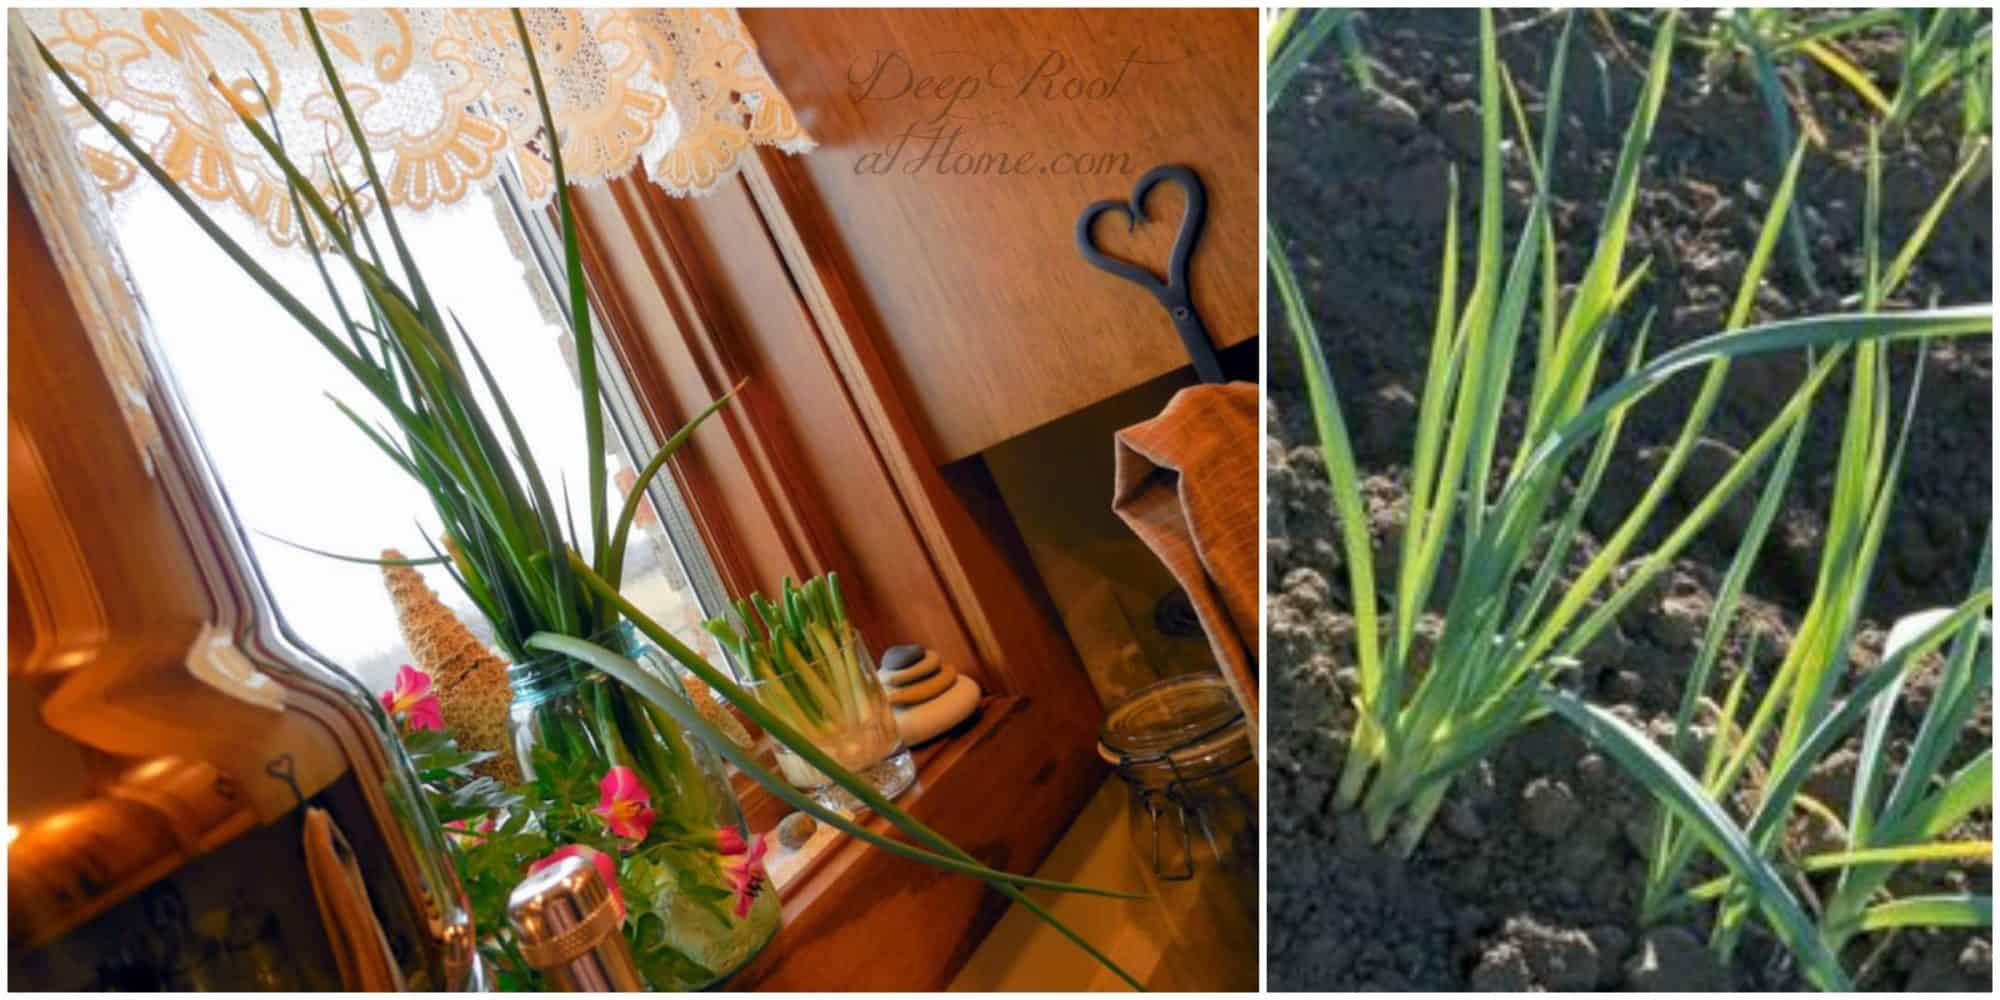  onions that have grown tall and tender...in garden